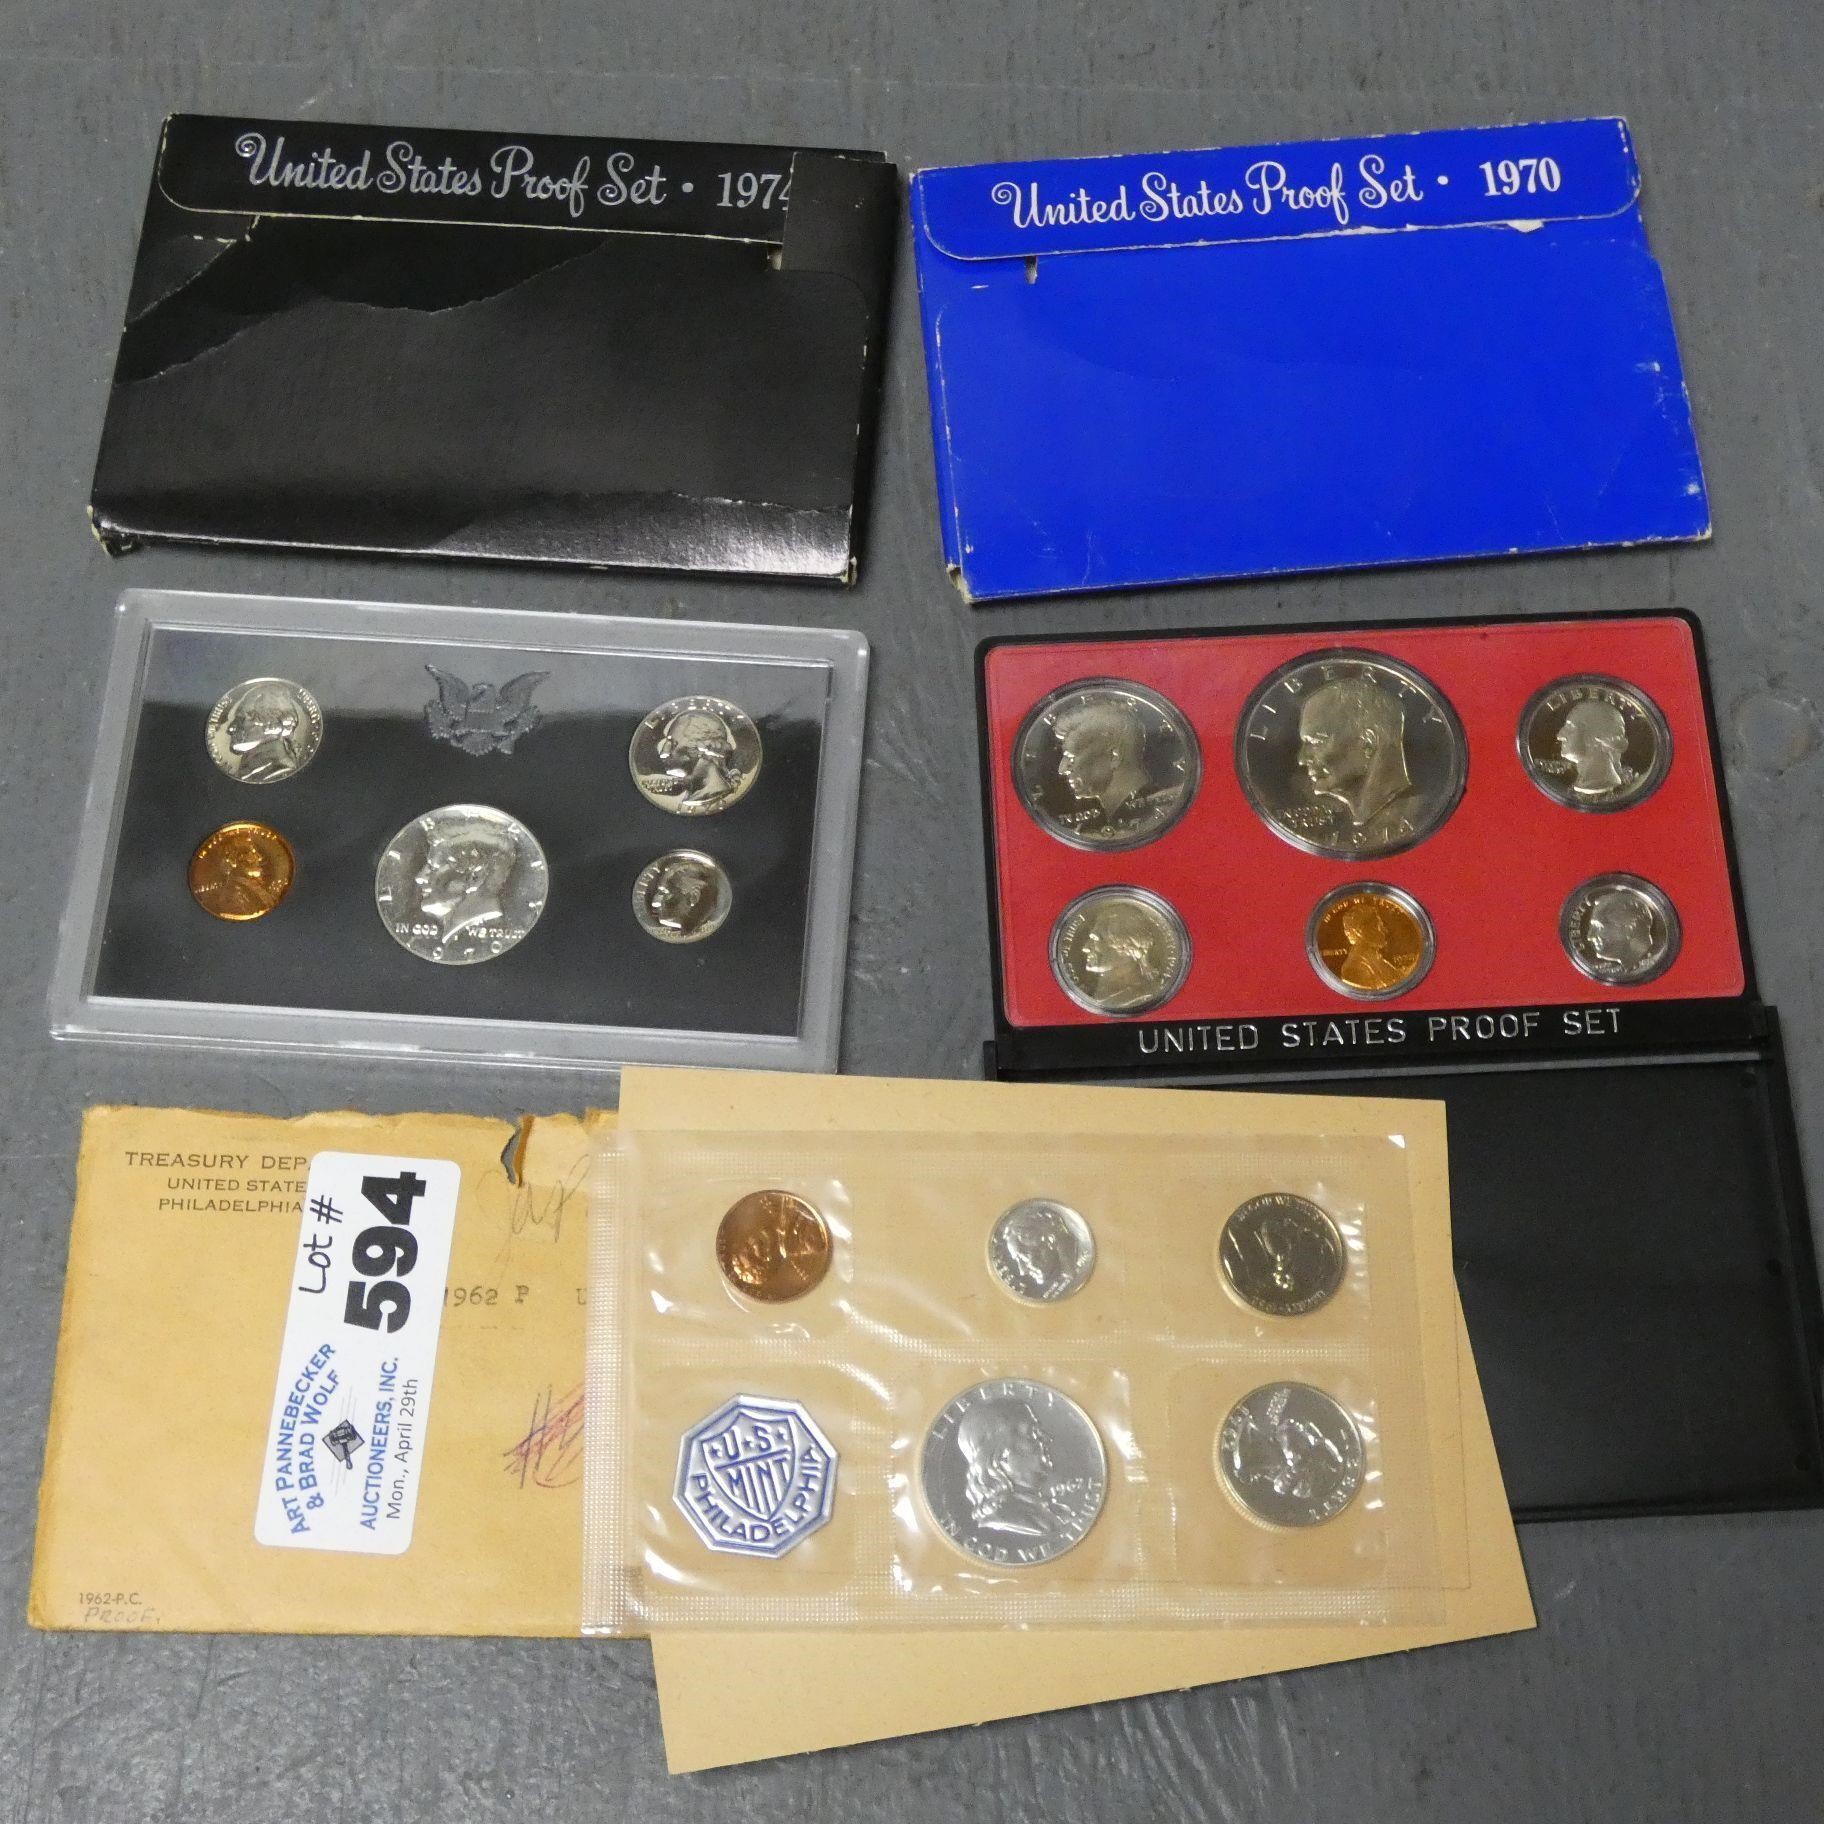 1962 Silver Proof Coin Set, 1970 & 1974 Sets